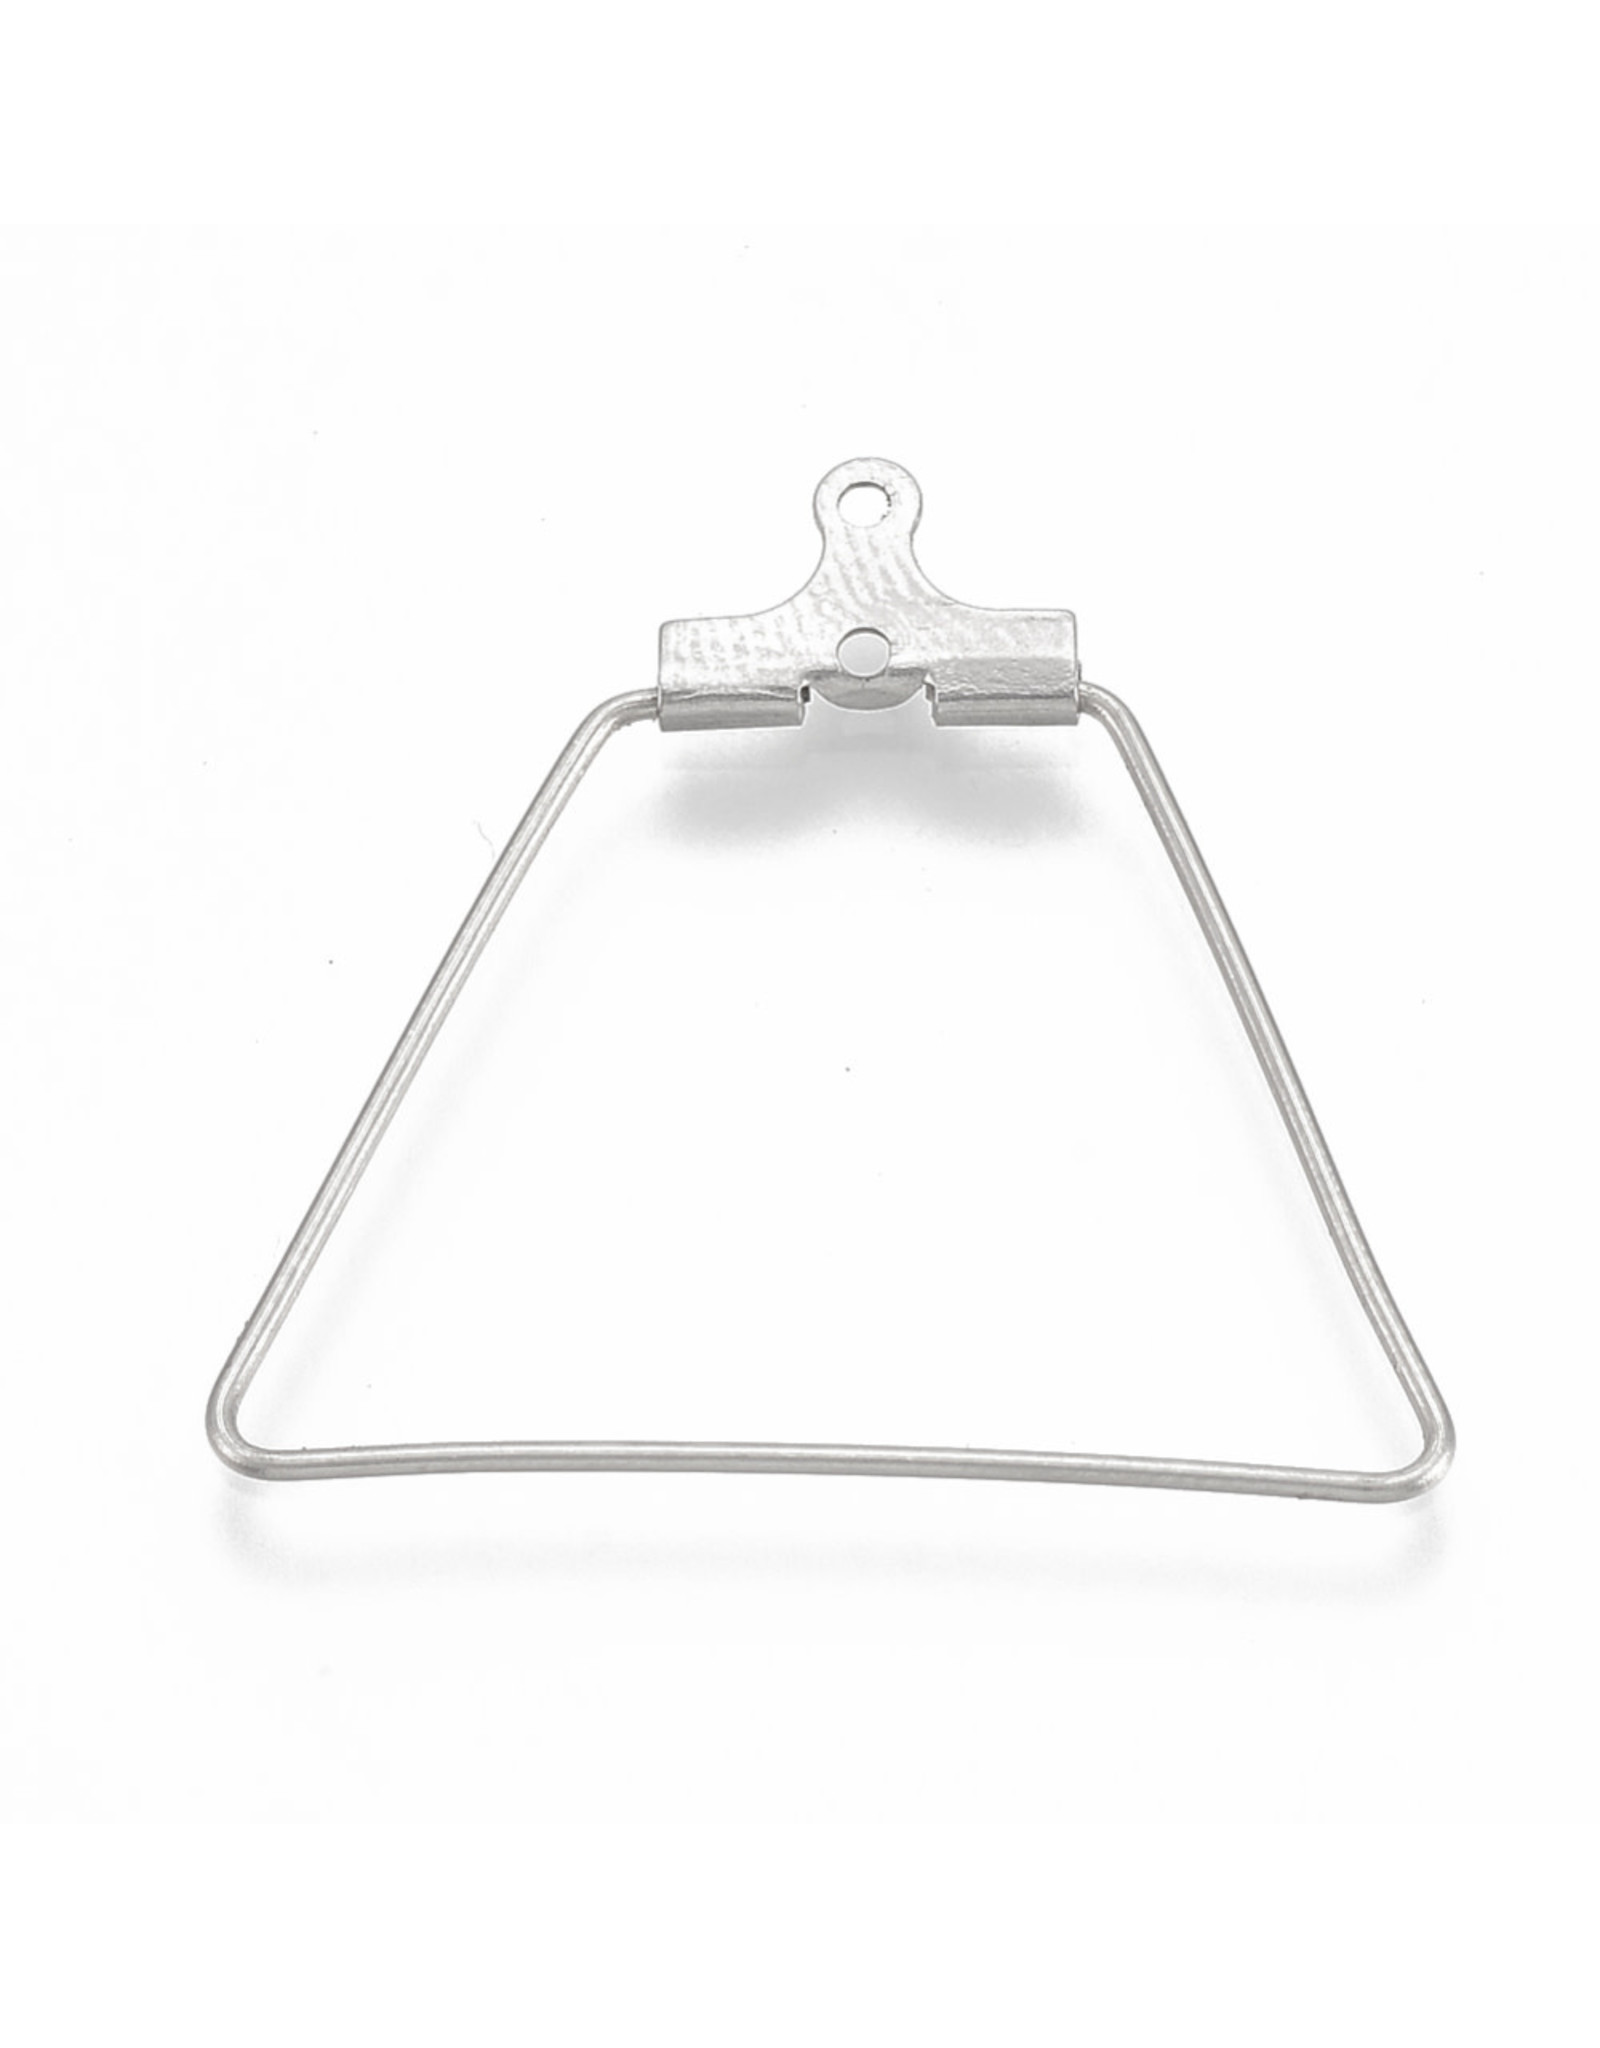 Earring Trapezoid  26x28mm Stainless Steel NF x10